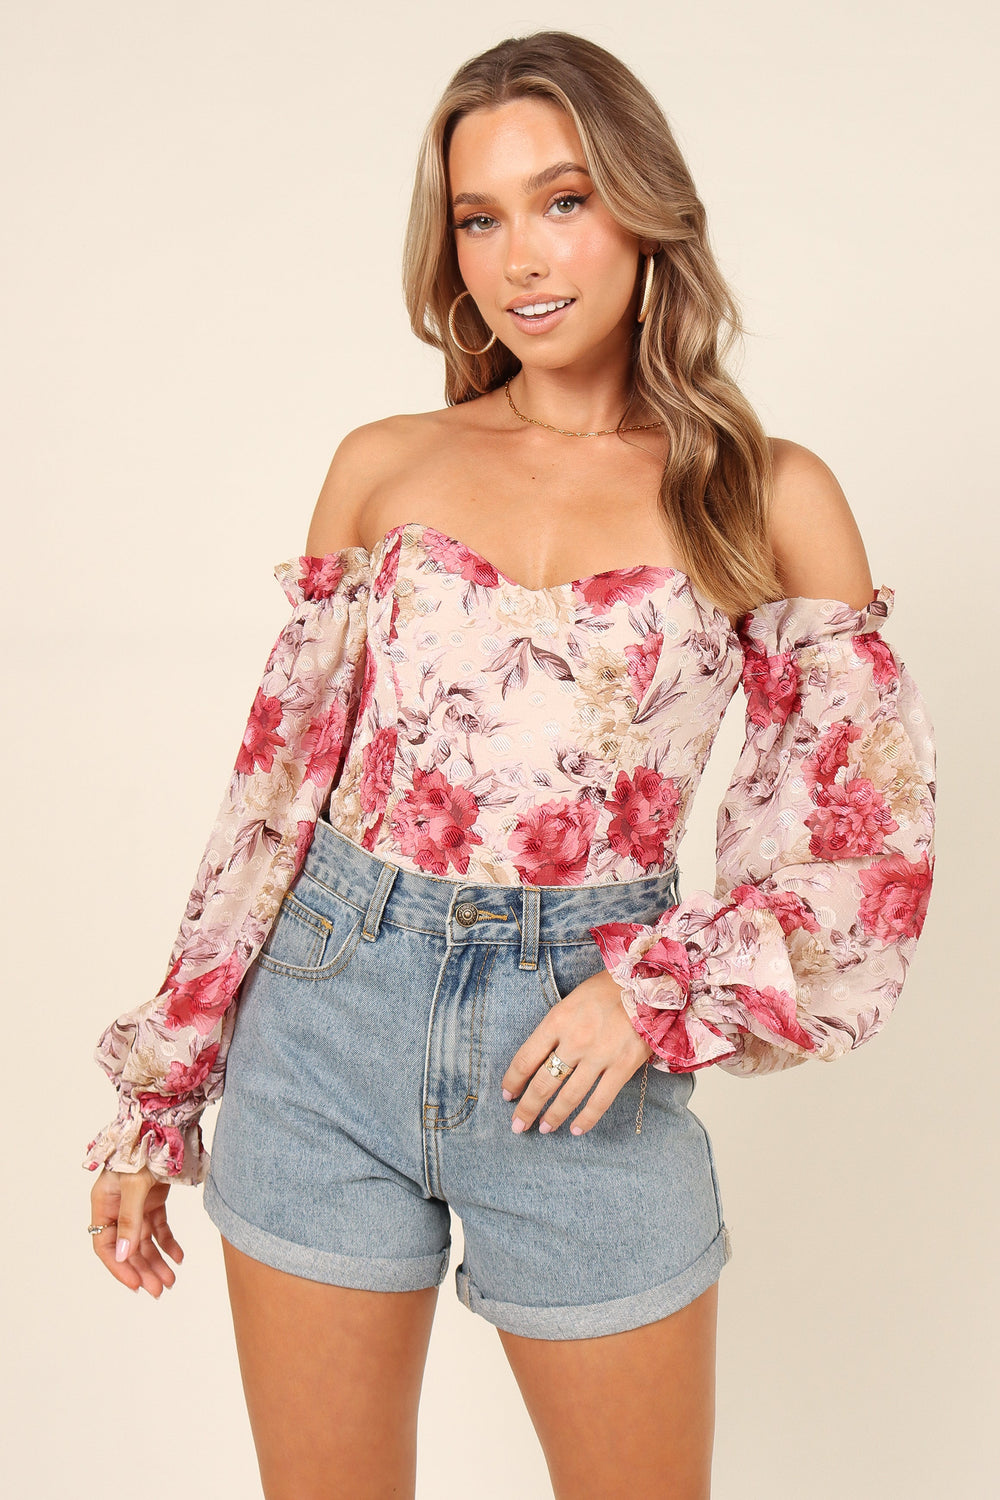 Petal and Pup USA TOPS Florence Bodysuit - Red Floral